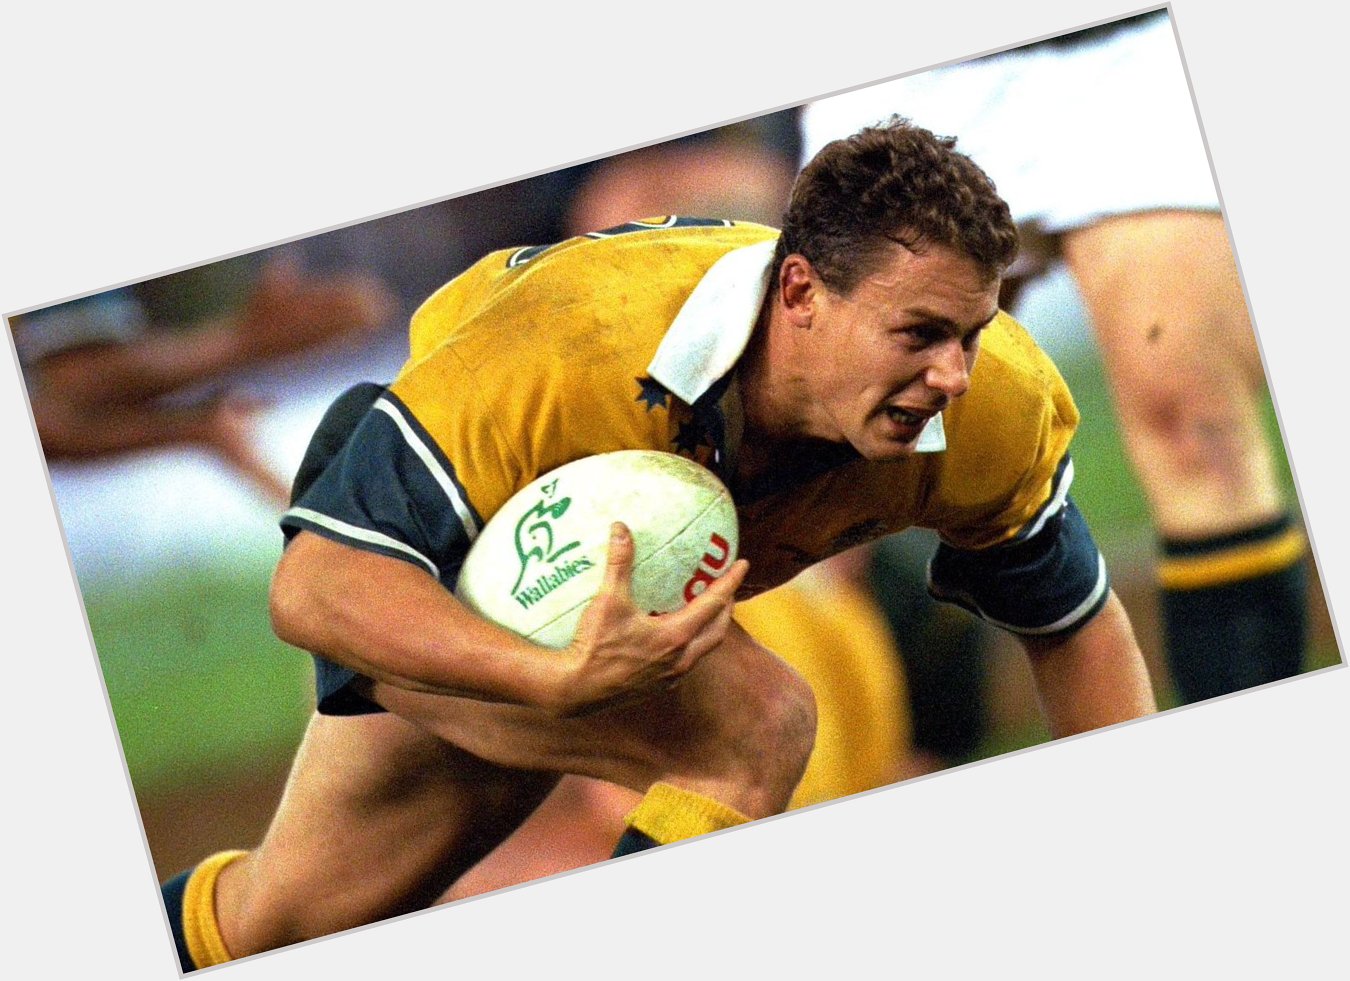 Happy birthday to Wallaby No. 683 Jason Little, who made his Test debut vs. France in Strasbourg (1989). 